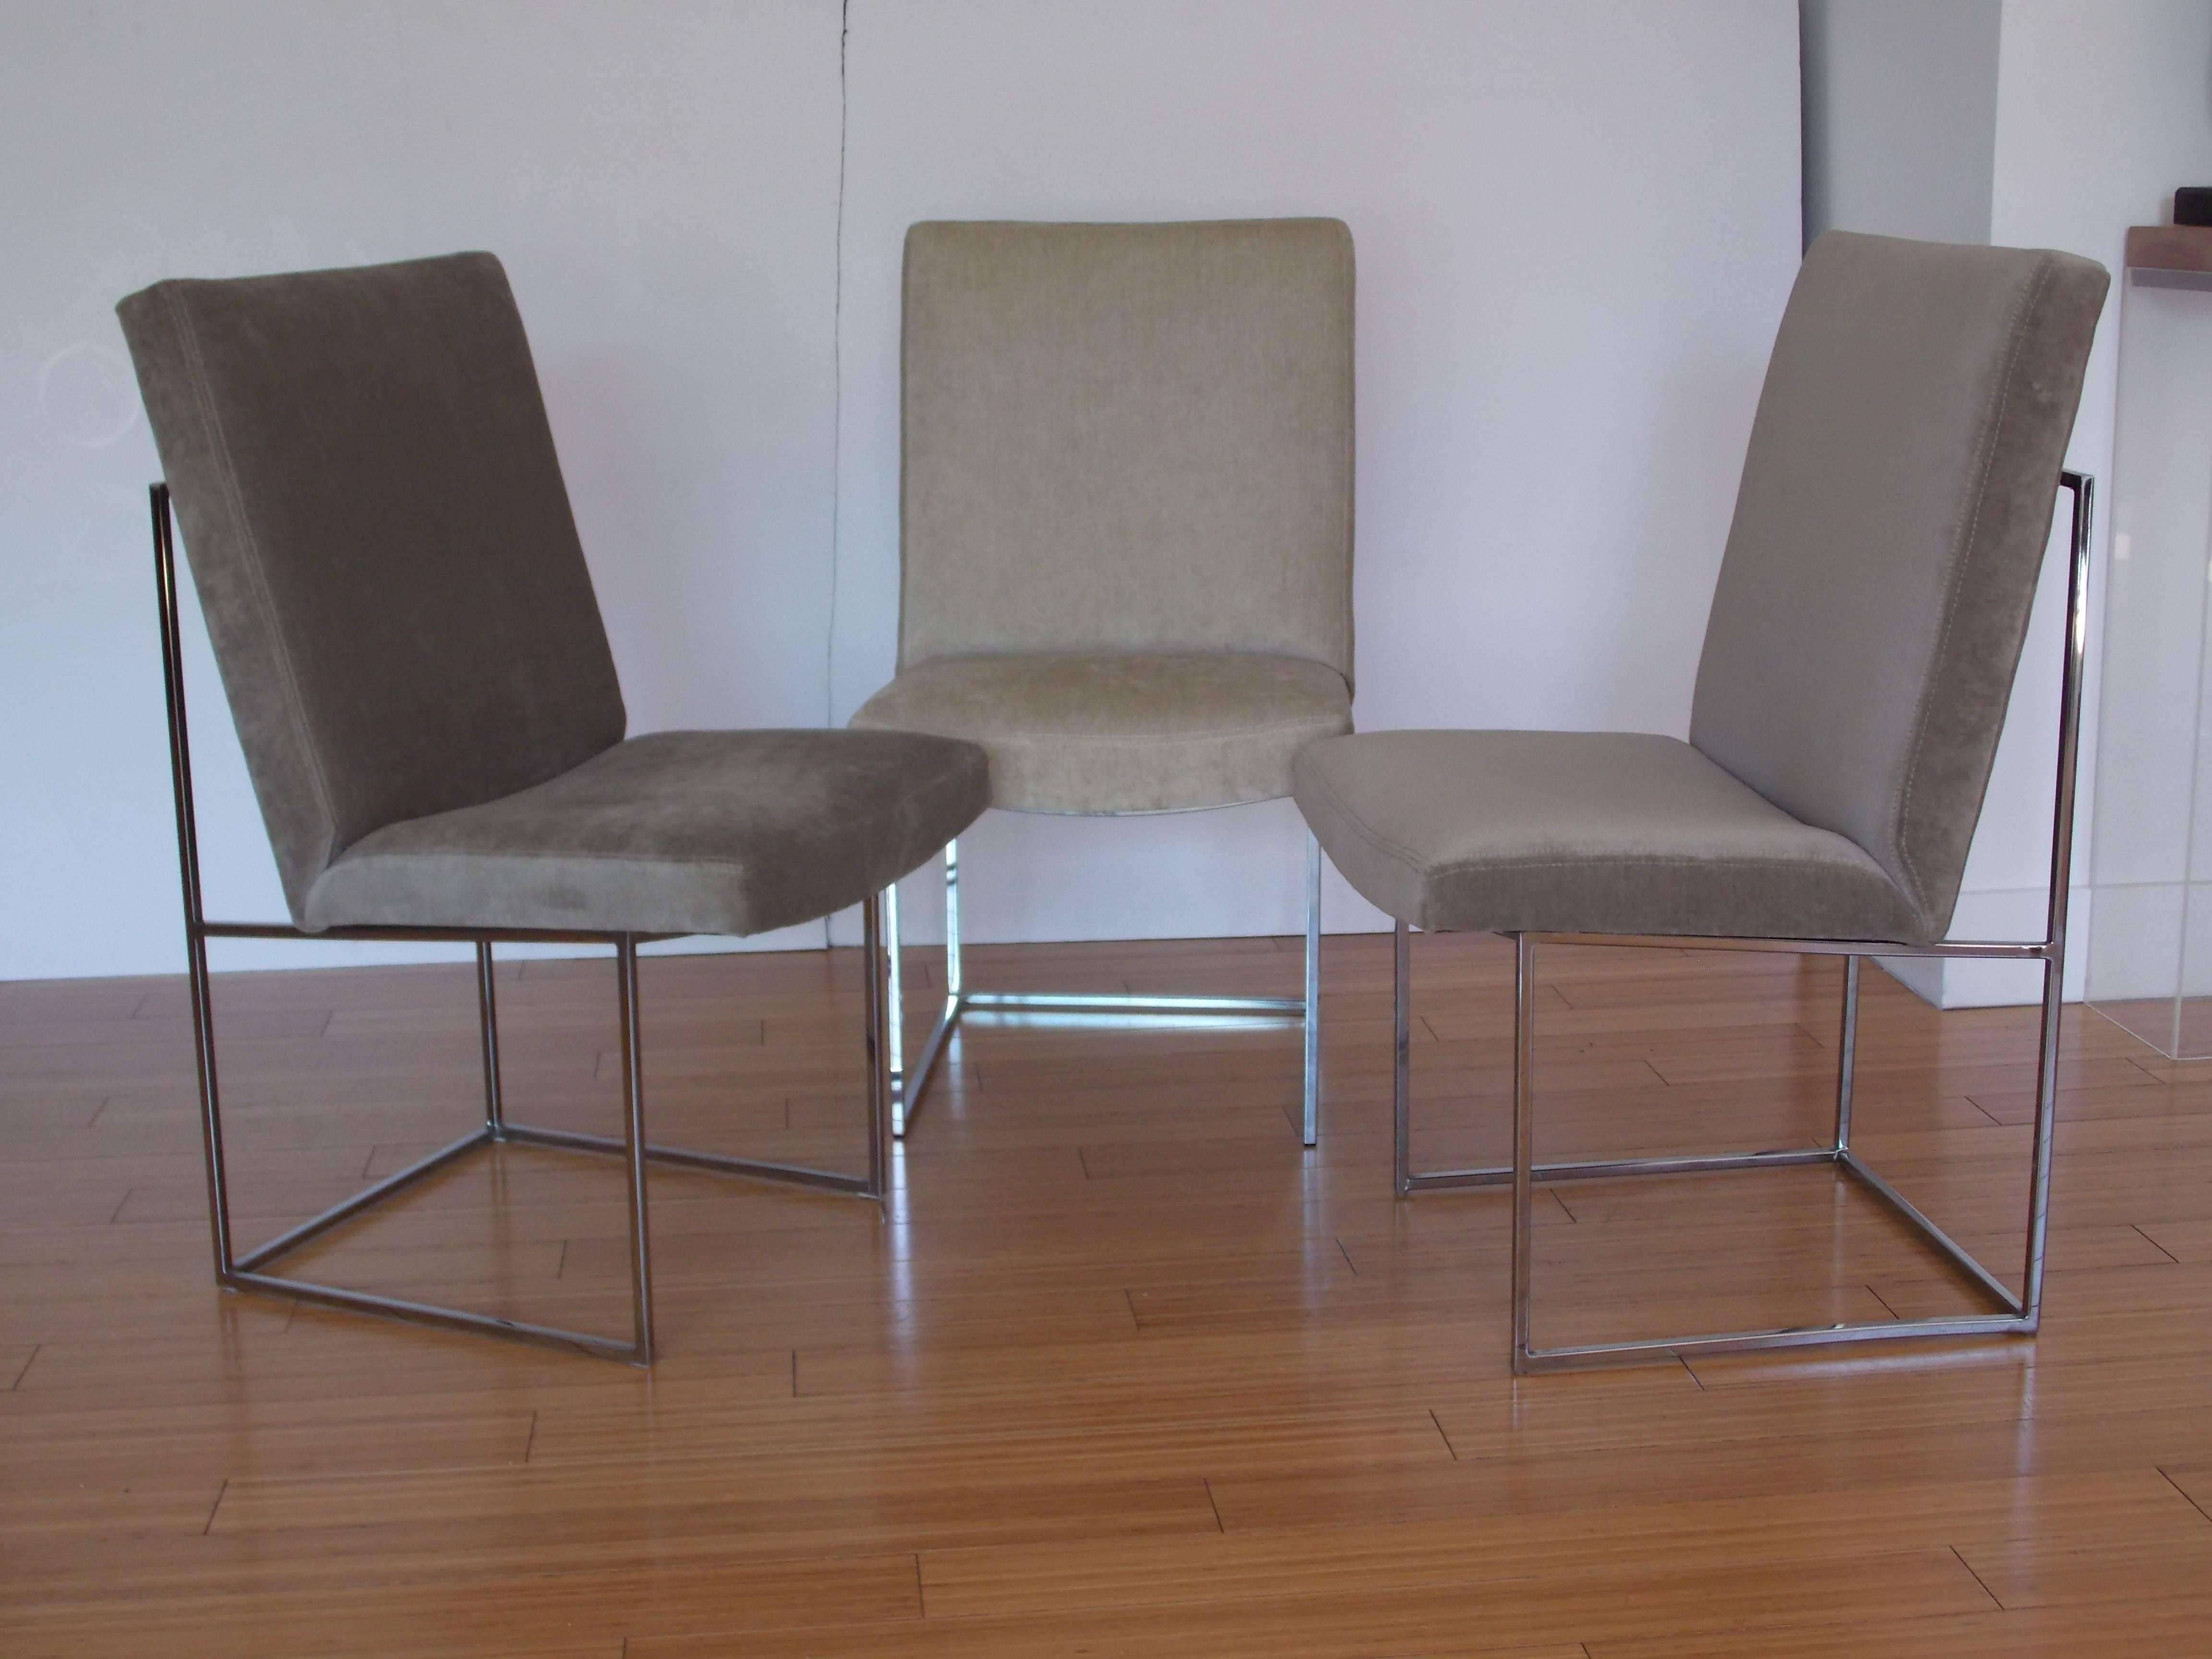 A handsome architectural design.
They've been reupholstered with an elegant mohair fabric.
The original labels have been reattached.
One chair is lighter than the other two, having a two-tone shades of grey effect.
The base is nickle-plated